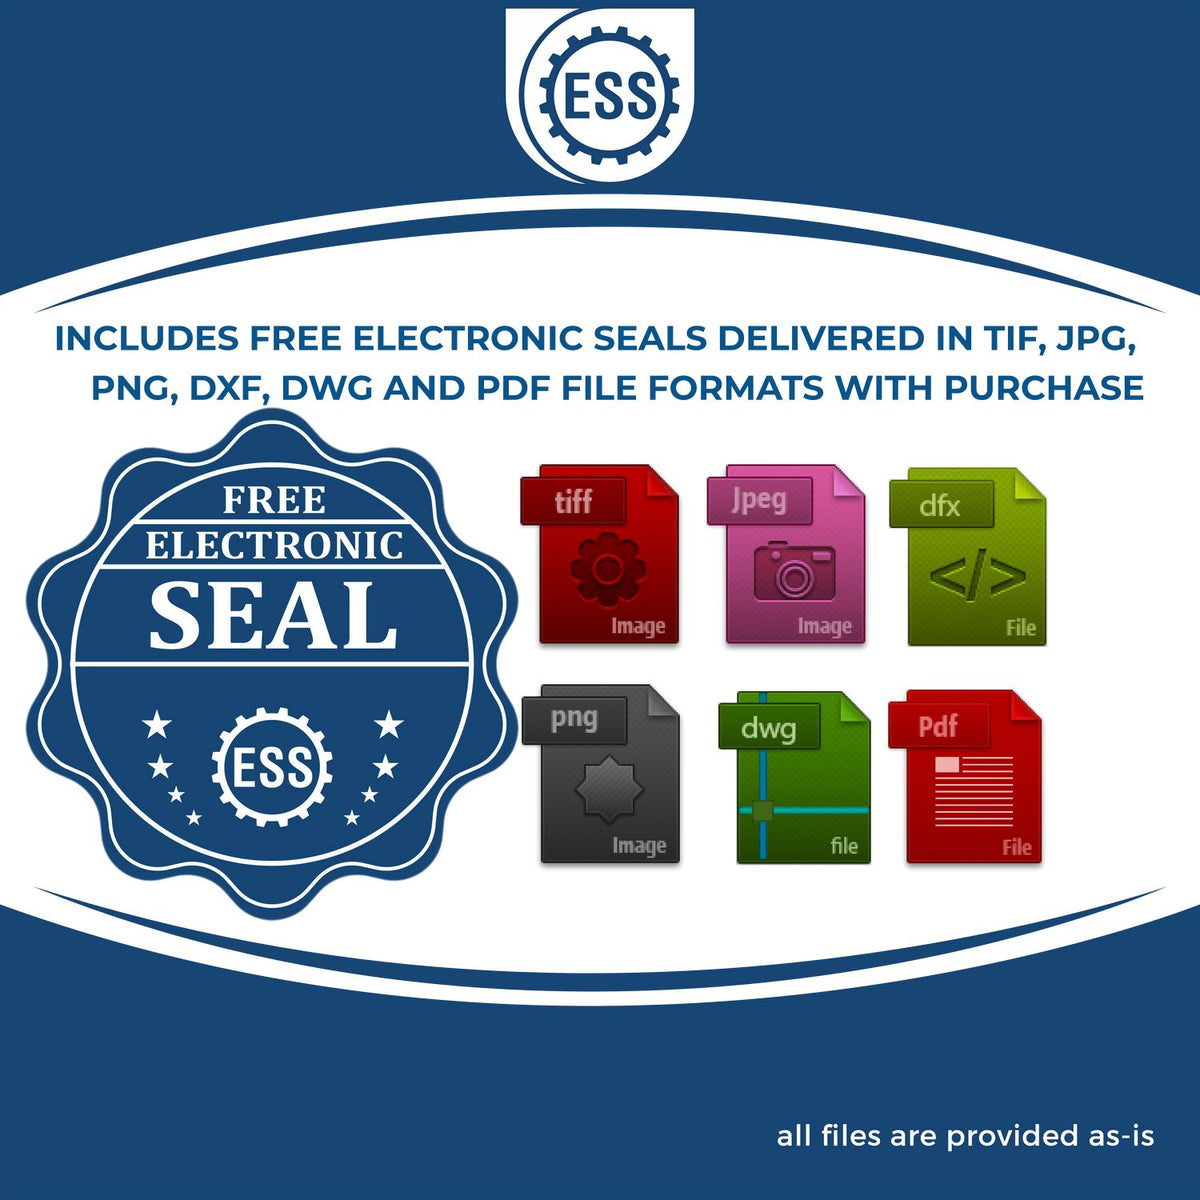 An infographic for the free electronic seal for the Premium MaxLight Pre-Inked Tennessee Landscape Architectural Stamp illustrating the different file type icons such as DXF, DWG, TIF, JPG and PNG.